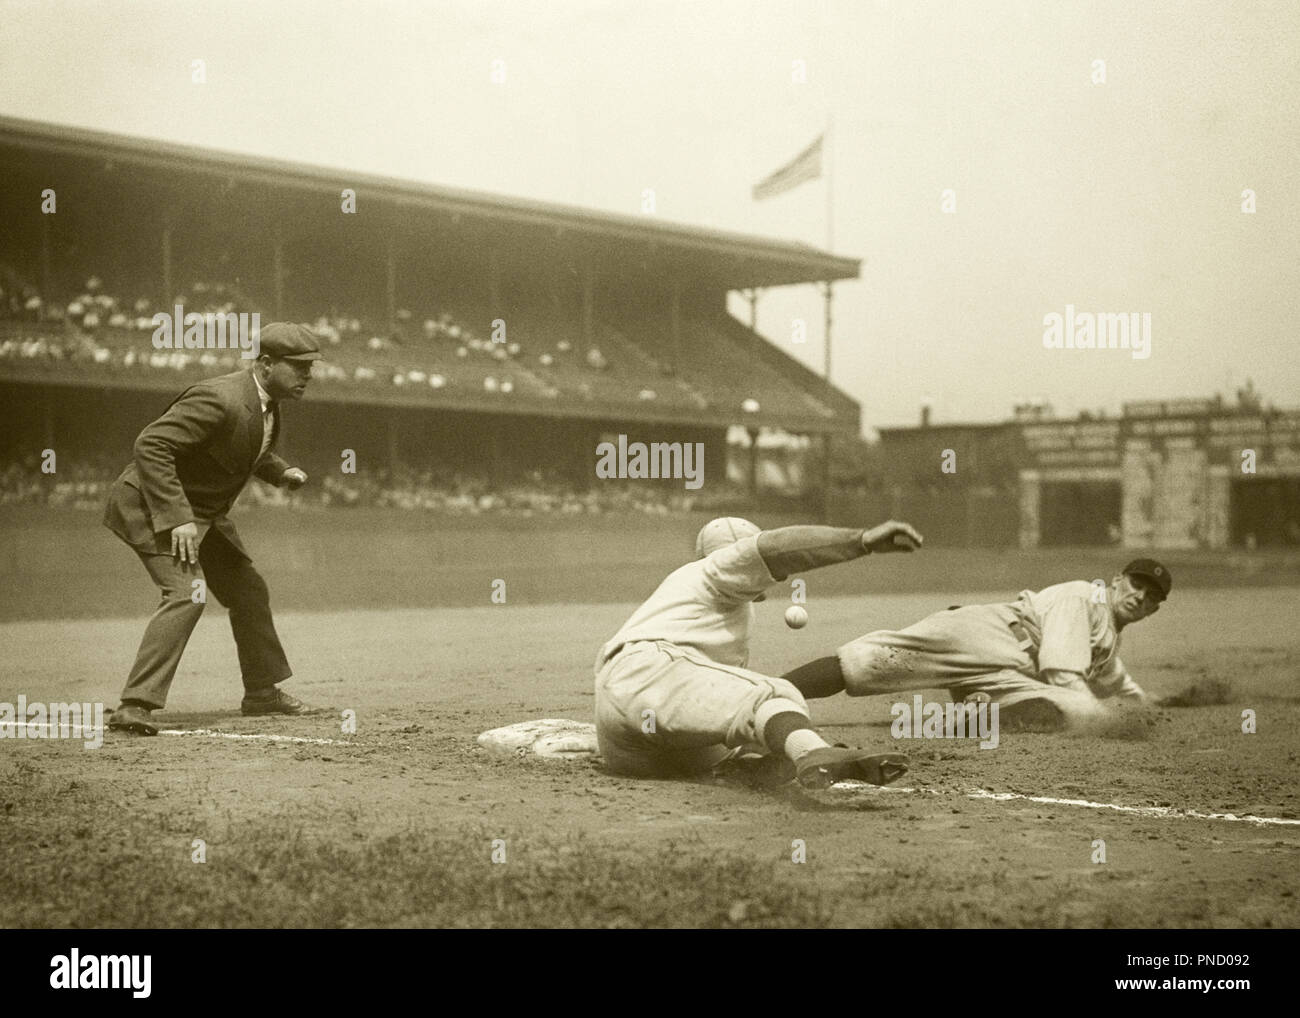 1920s 1926 BASEBALL PLAYER SLIDING SAFE INTO THIRD BASE CLEVELAND INDIANS VS ATHLETICS AT SHIBE PARK PHILADELPHIA PA USA  - b4002 HAR001 HARS MALES ATHLETIC ENTERTAINMENT CONFIDENCE B&W SUCCESS WIDE ANGLE STRENGTH UMPIRE VICTORY STRATEGY BASE EXCITEMENT LOW ANGLE SLIDING 1926 AT INTO AUTHORITY OCCUPATIONS PROFESSIONAL SPORTS AKA GRANDSTANDS VS STYLISH CONNIE MACK STADIUM SHIBE PARK MID-ADULT MID-ADULT MAN PHILADELPHIA ATHLETICS PRECISION YOUNG ADULT MAN BLACK AND WHITE CAUCASIAN ETHNICITY HAR001 OLD FASHIONED Stock Photo